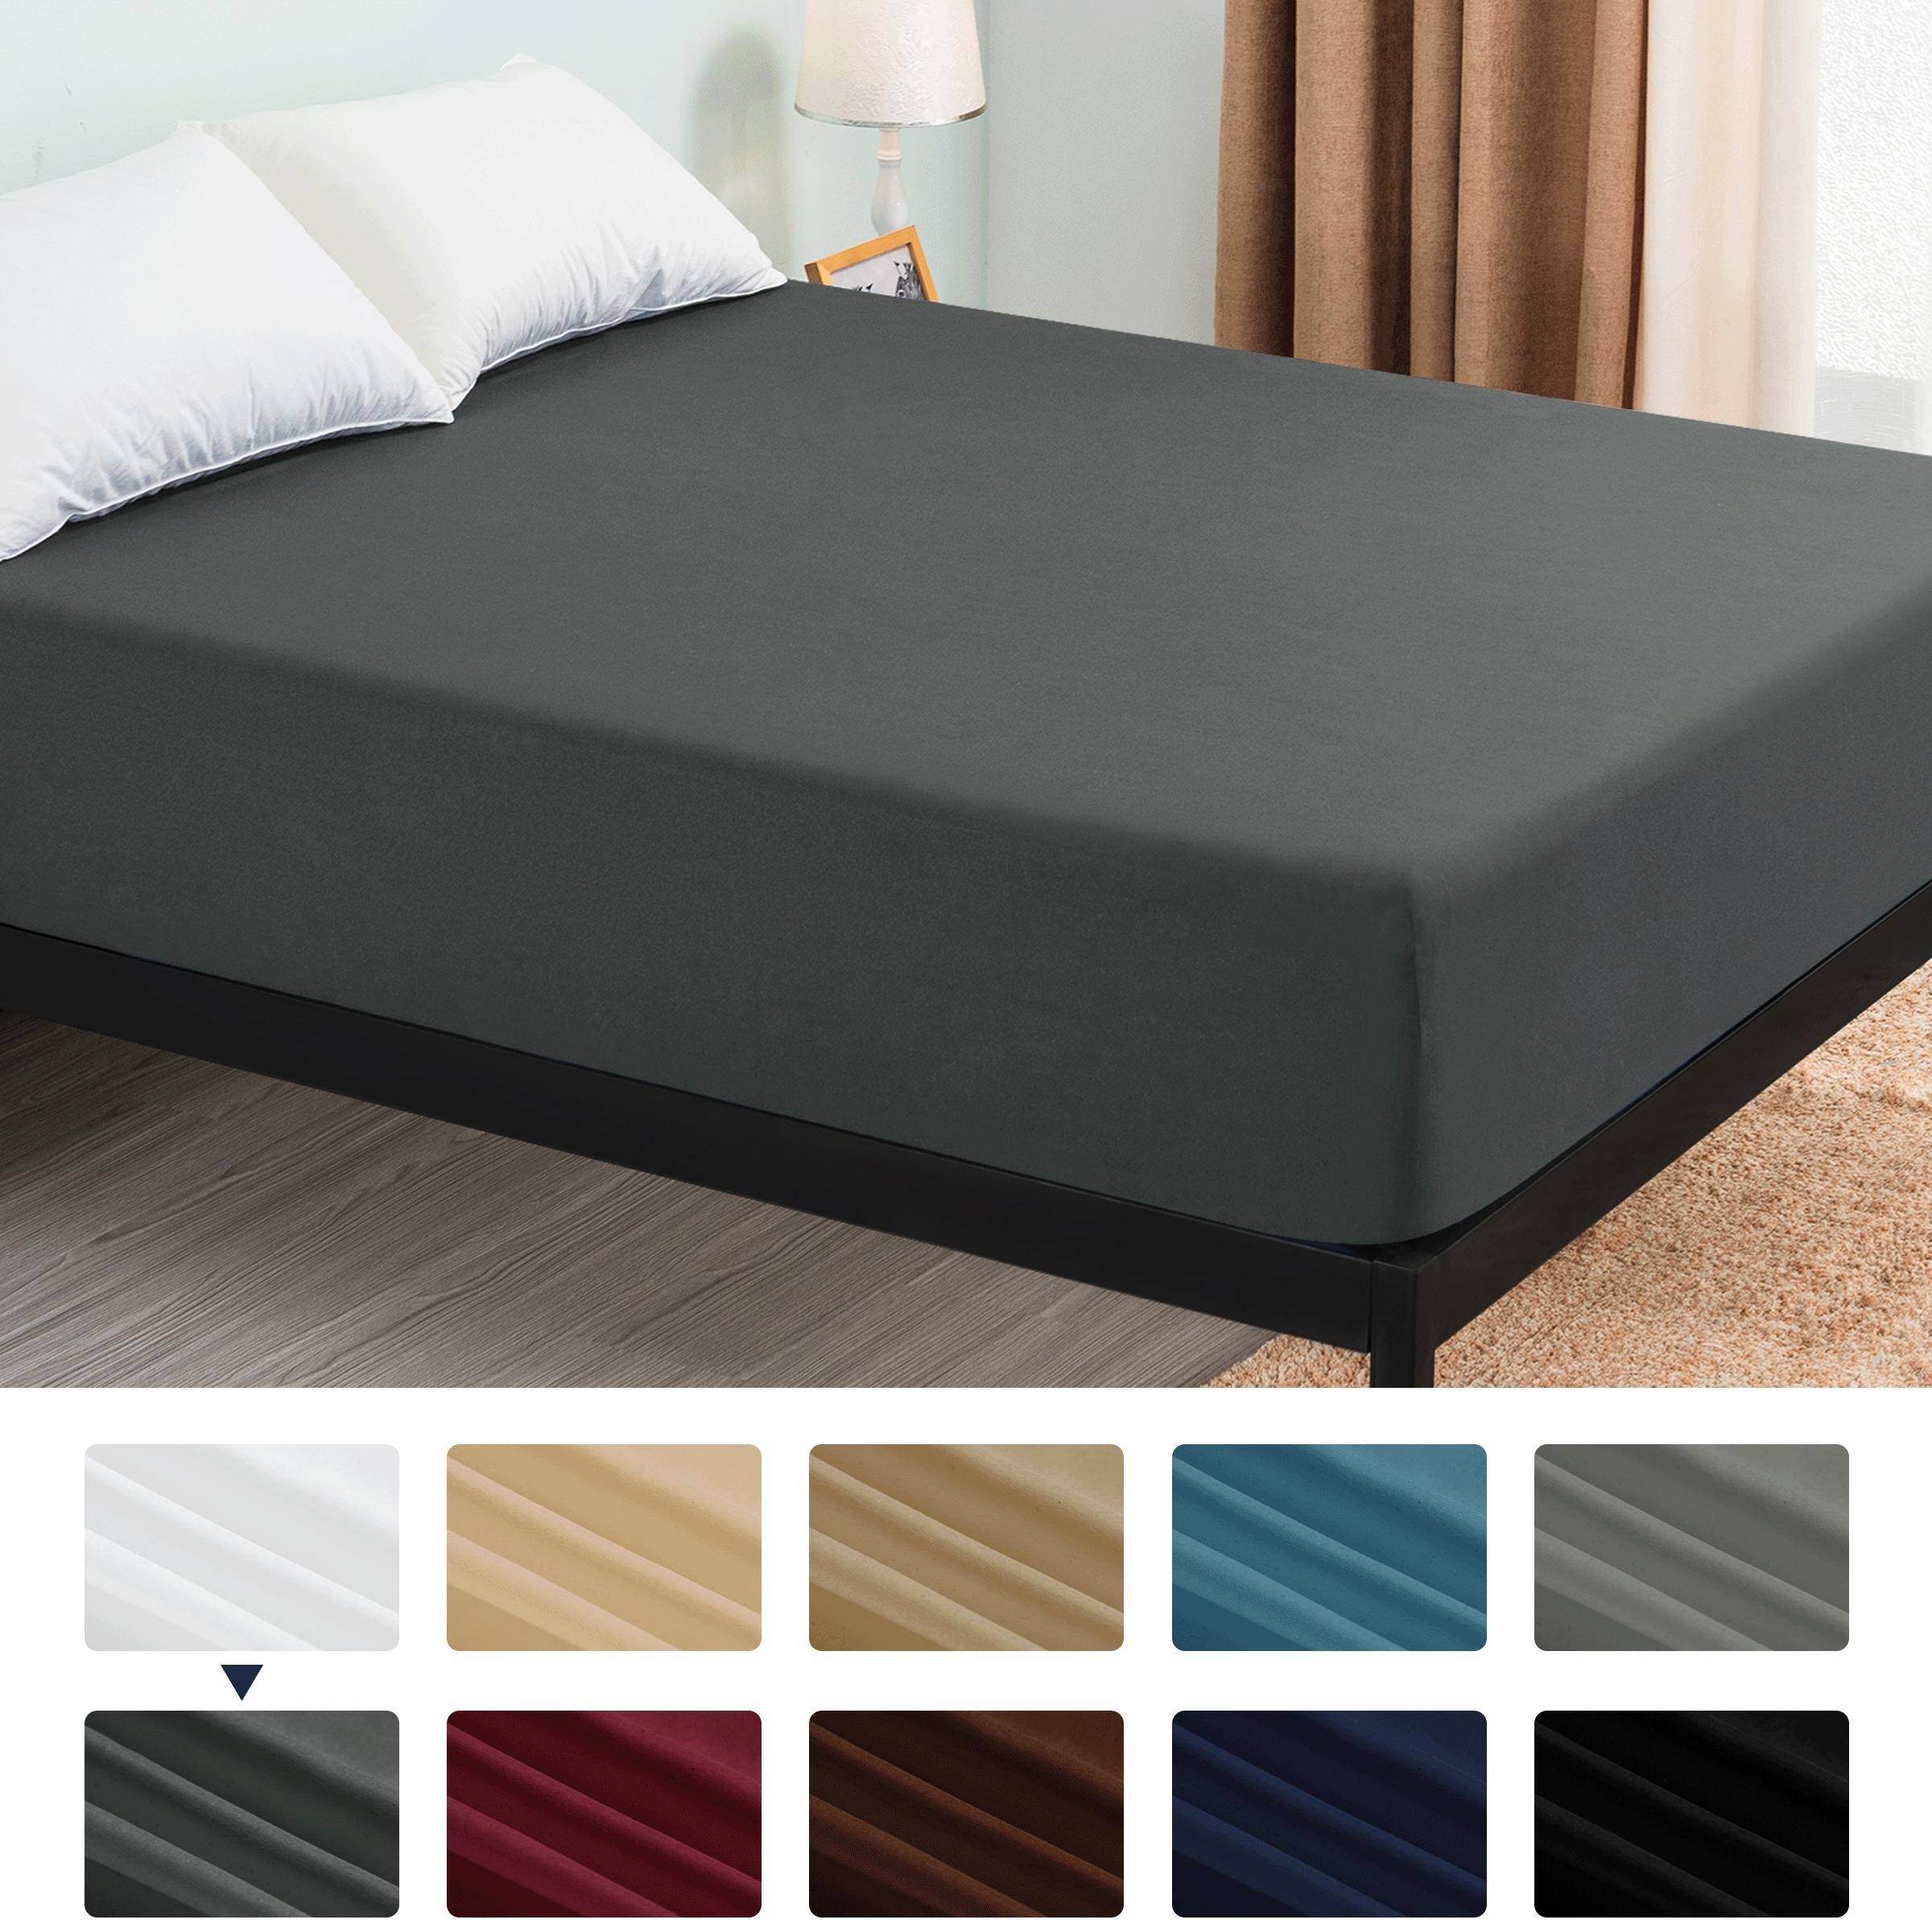 https://ak1.ostkcdn.com/images/products/is/images/direct/ae6842349d21c03bf87f8225c267bf4623c73c59/Subrtex-Premium-Microfiber-15-inch-Deep-Pocket-Fitted-Sheet.jpg